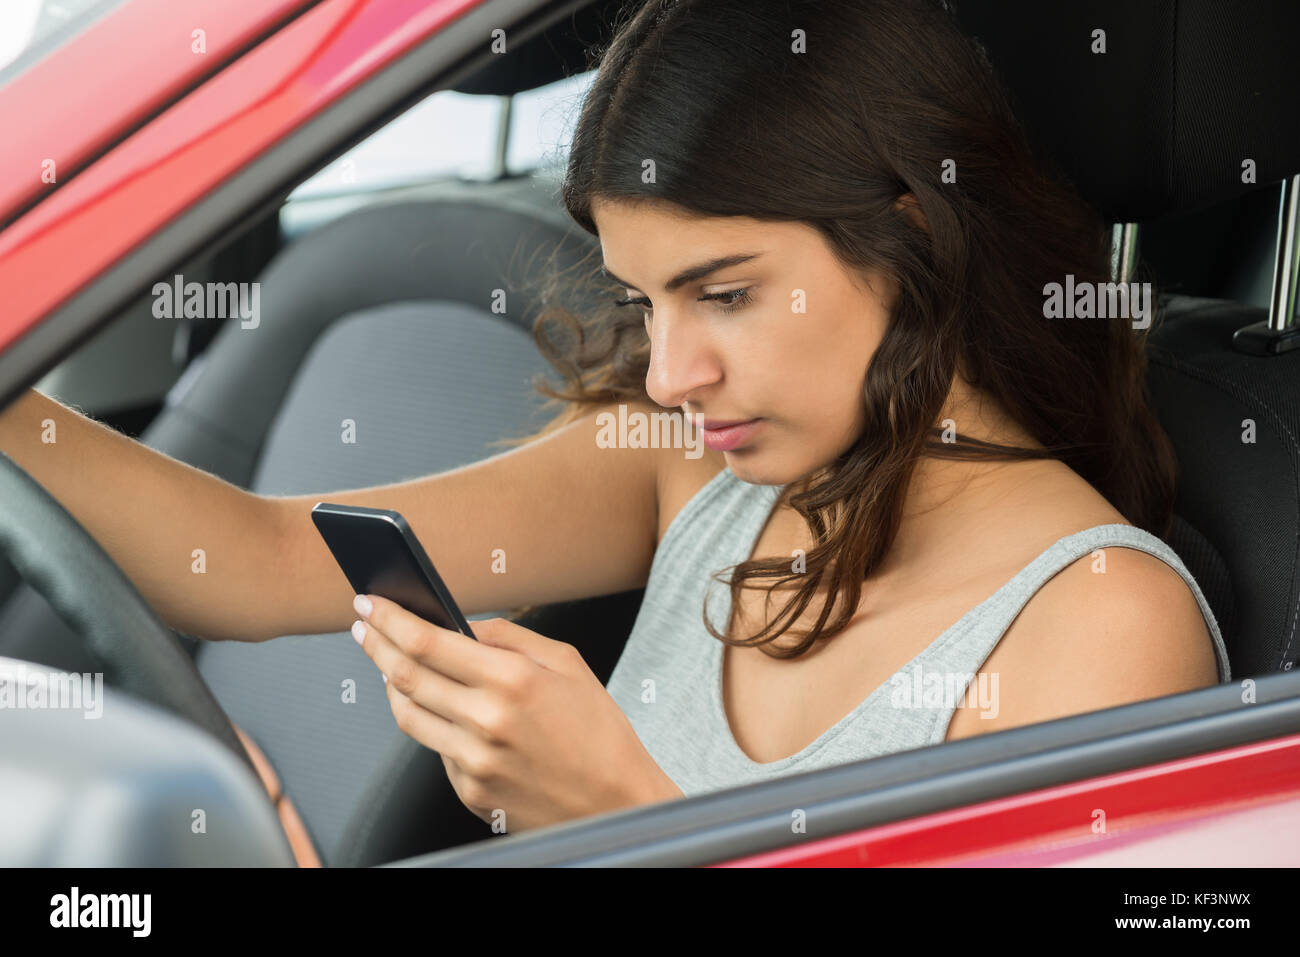 Photo Of Woman Sitting Inside Car Using Cellphone Stock Photo